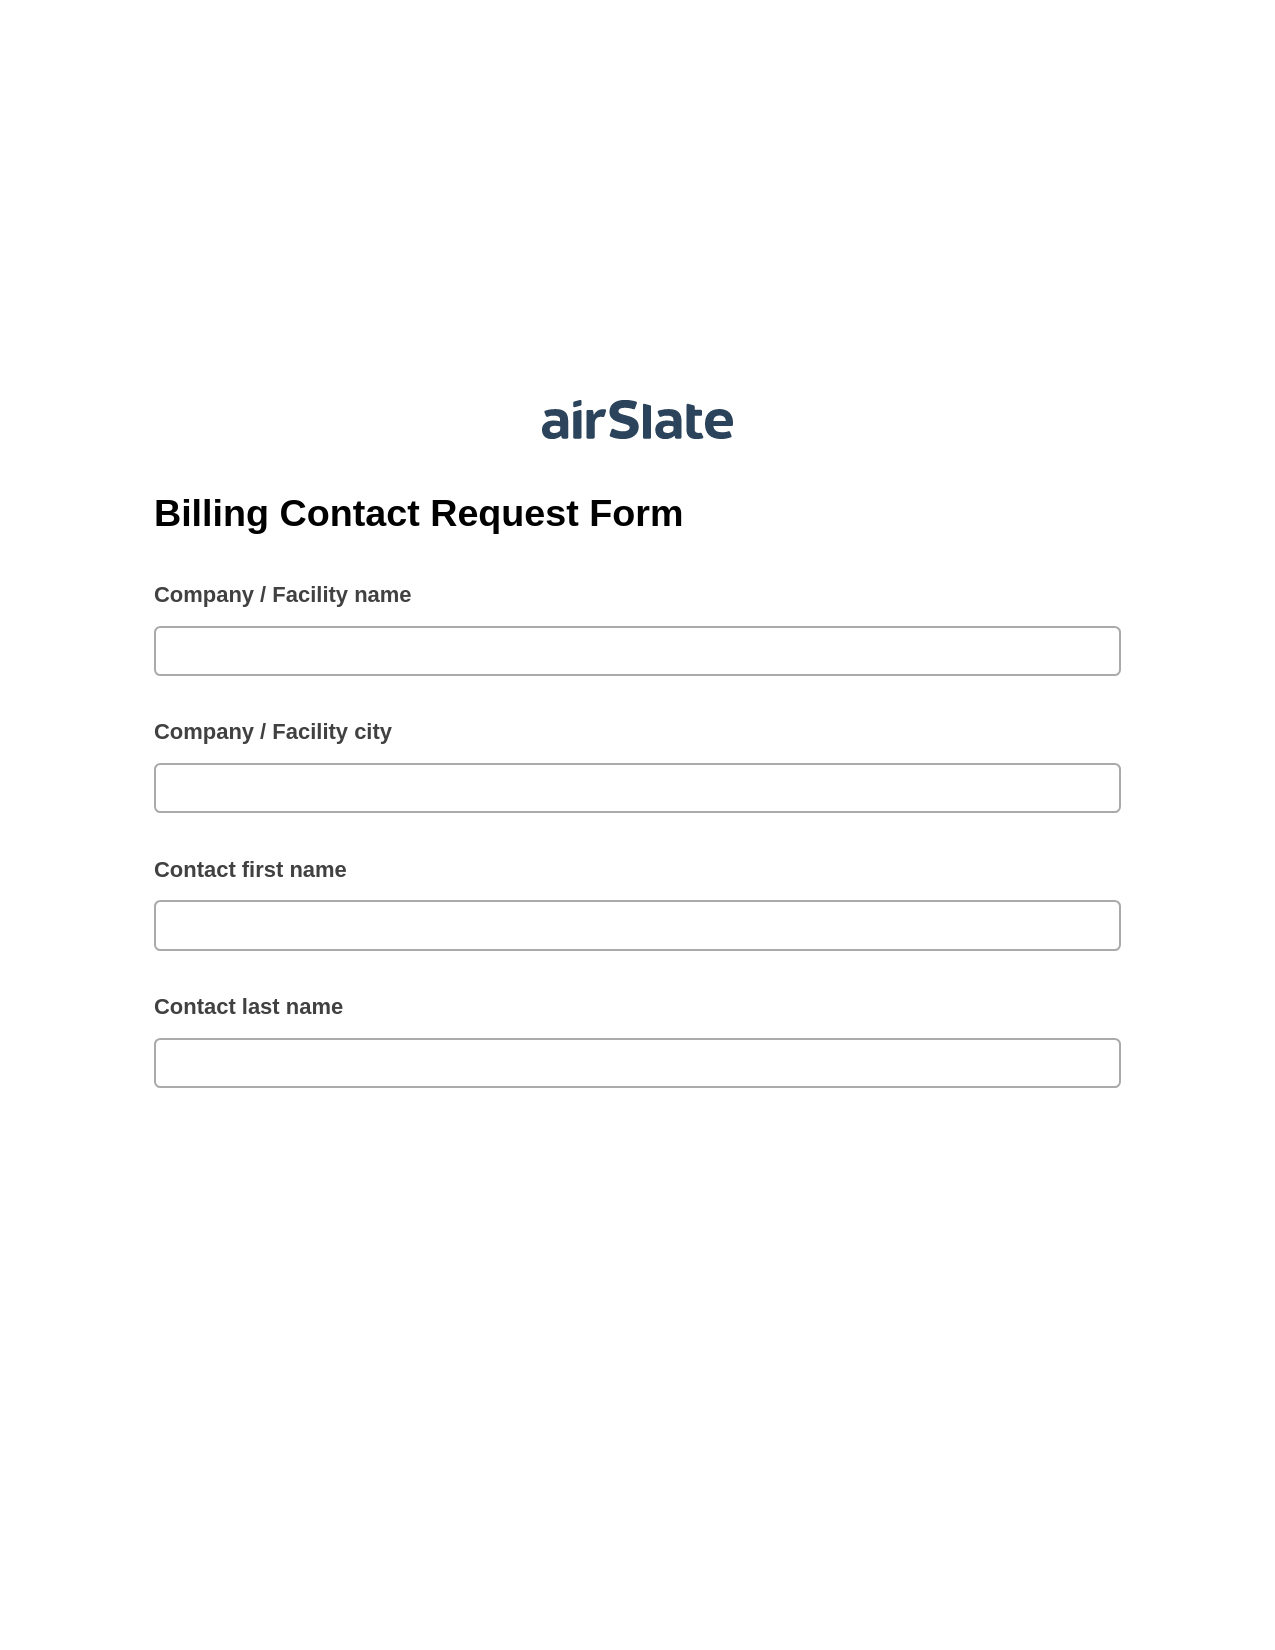 Multirole Billing Contact Request Form System Bot - Slack Two-Way Binding Bot, Send a Slate to MS Dynamics 365 Contact Bot, Archive to SharePoint Folder Bot